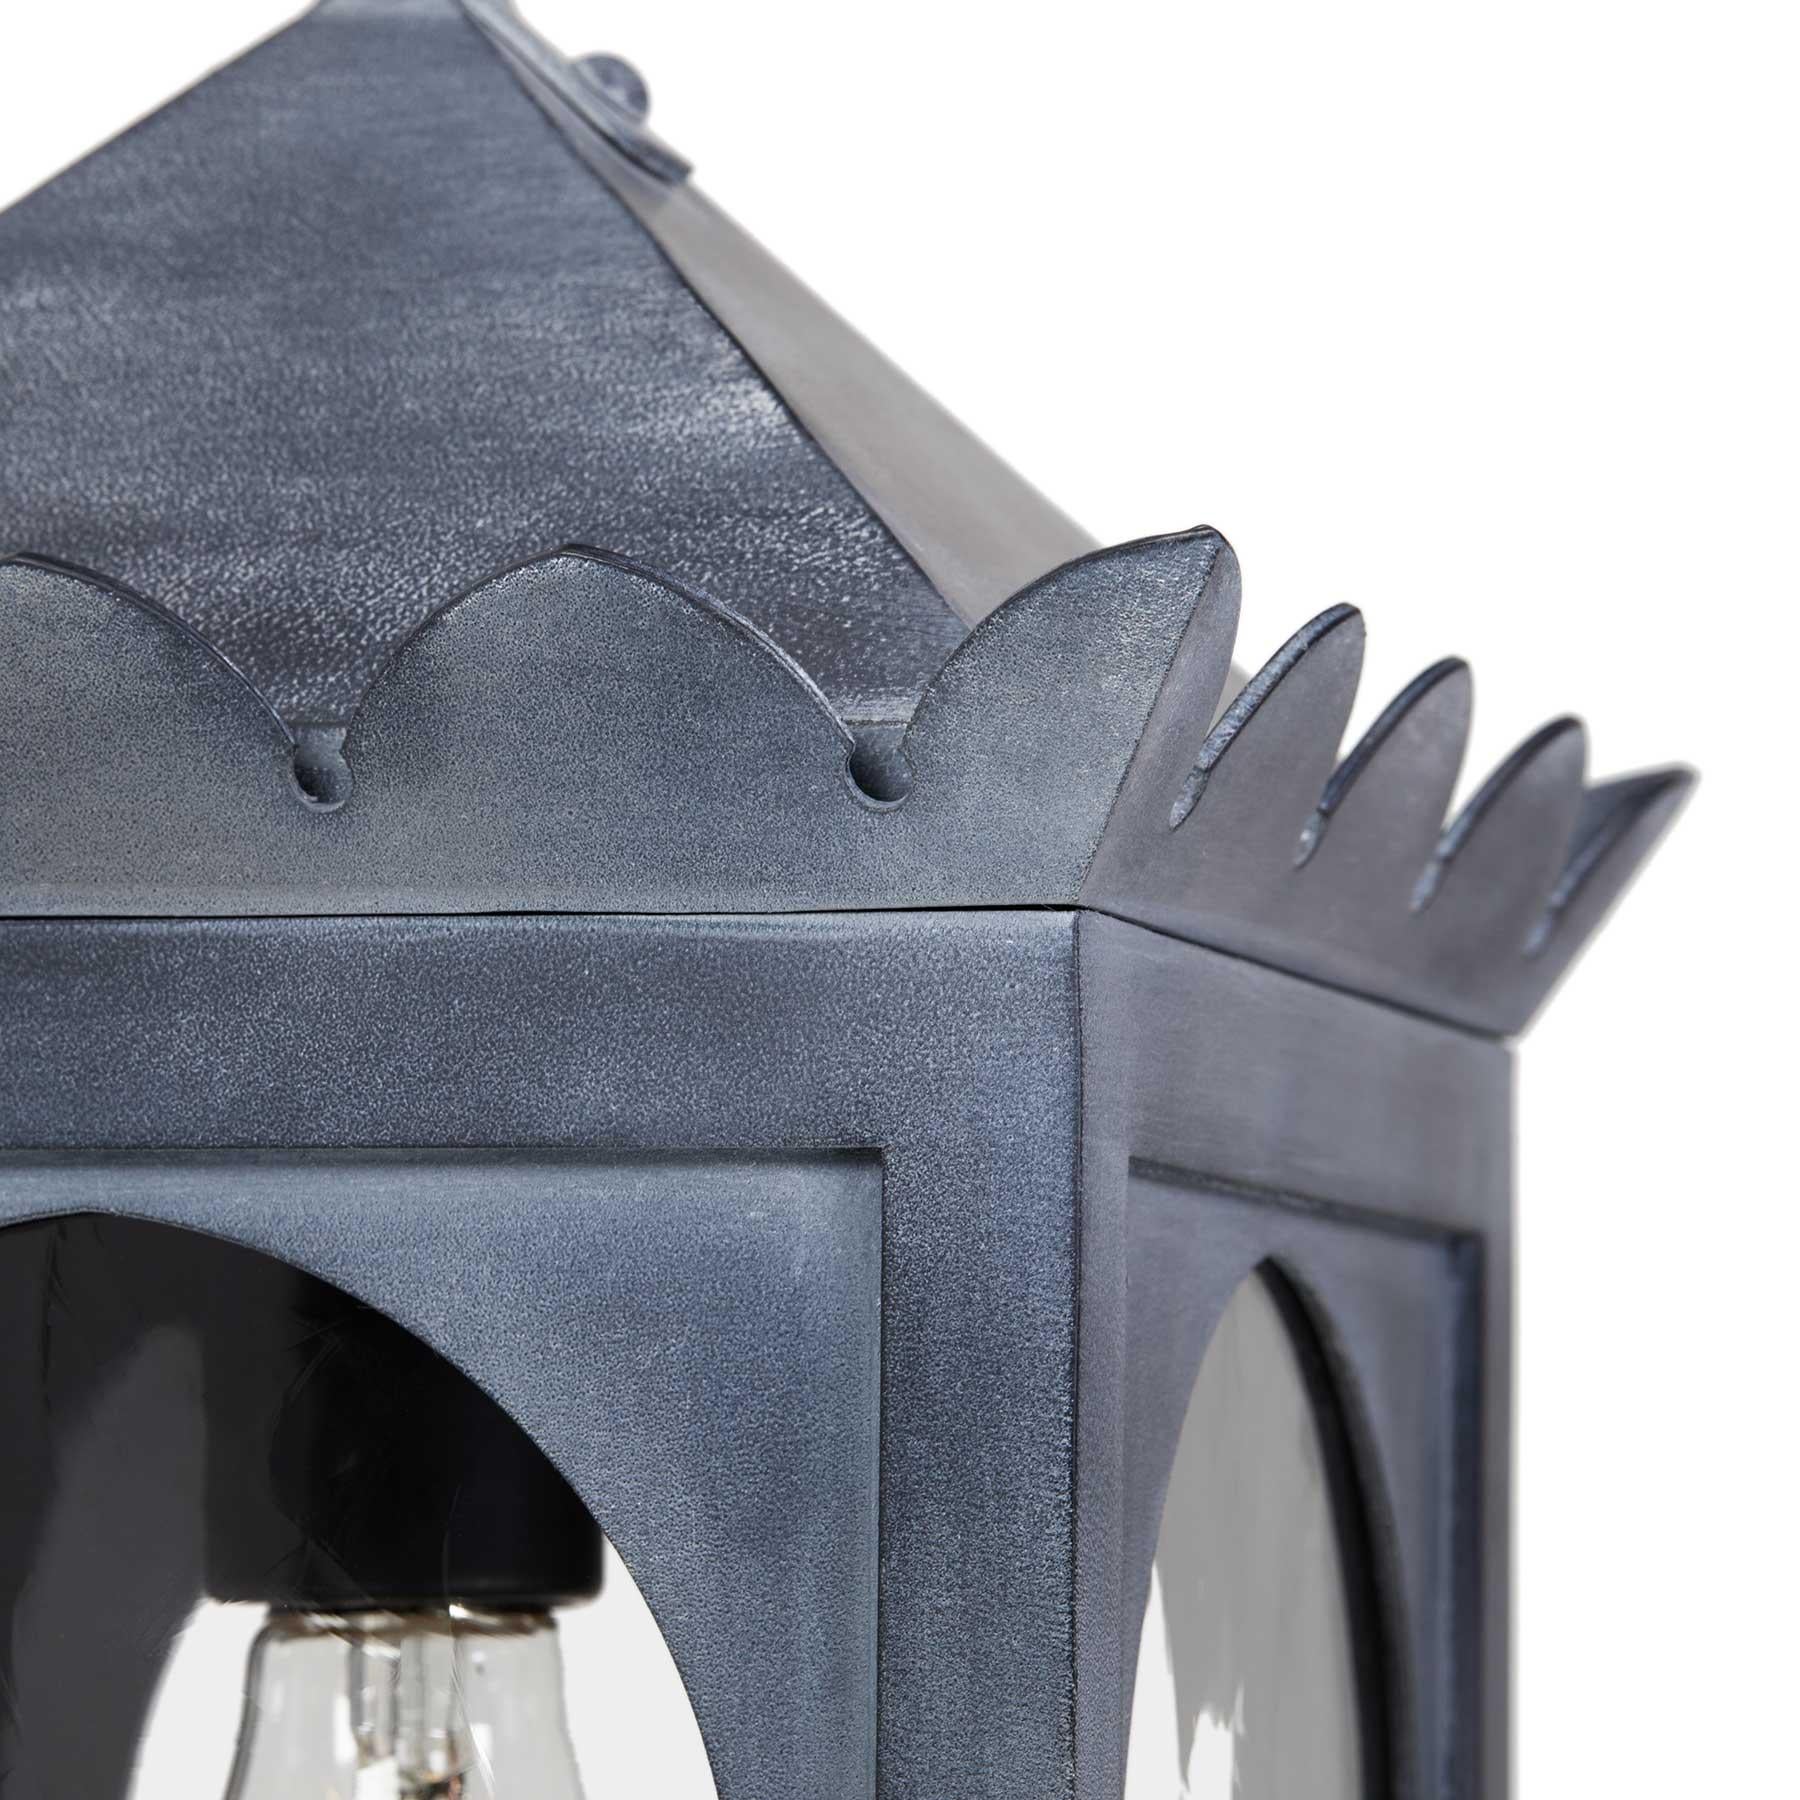 The Zara is a Moorish style exterior light fixture designed to add a touch of exotic elegance to your space. Hand-crafted from heavy gauge steel, this fixture is built to last and radiates a robust aura of strength and durability. The Zinc Finish